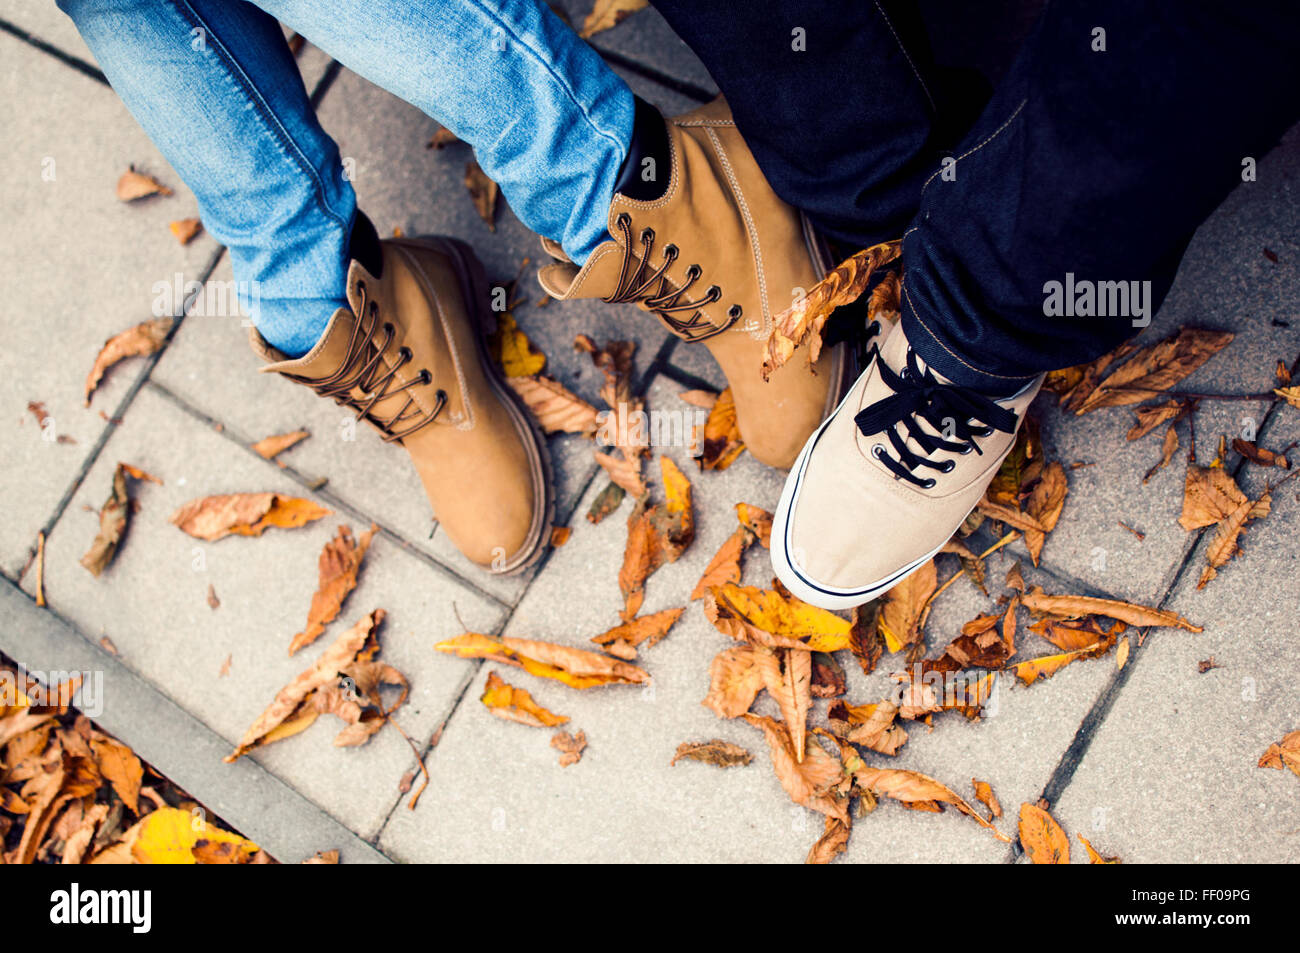 Two Pairs of Feet in Shoes Two Pairs of Feet in Shoe Stock Photo